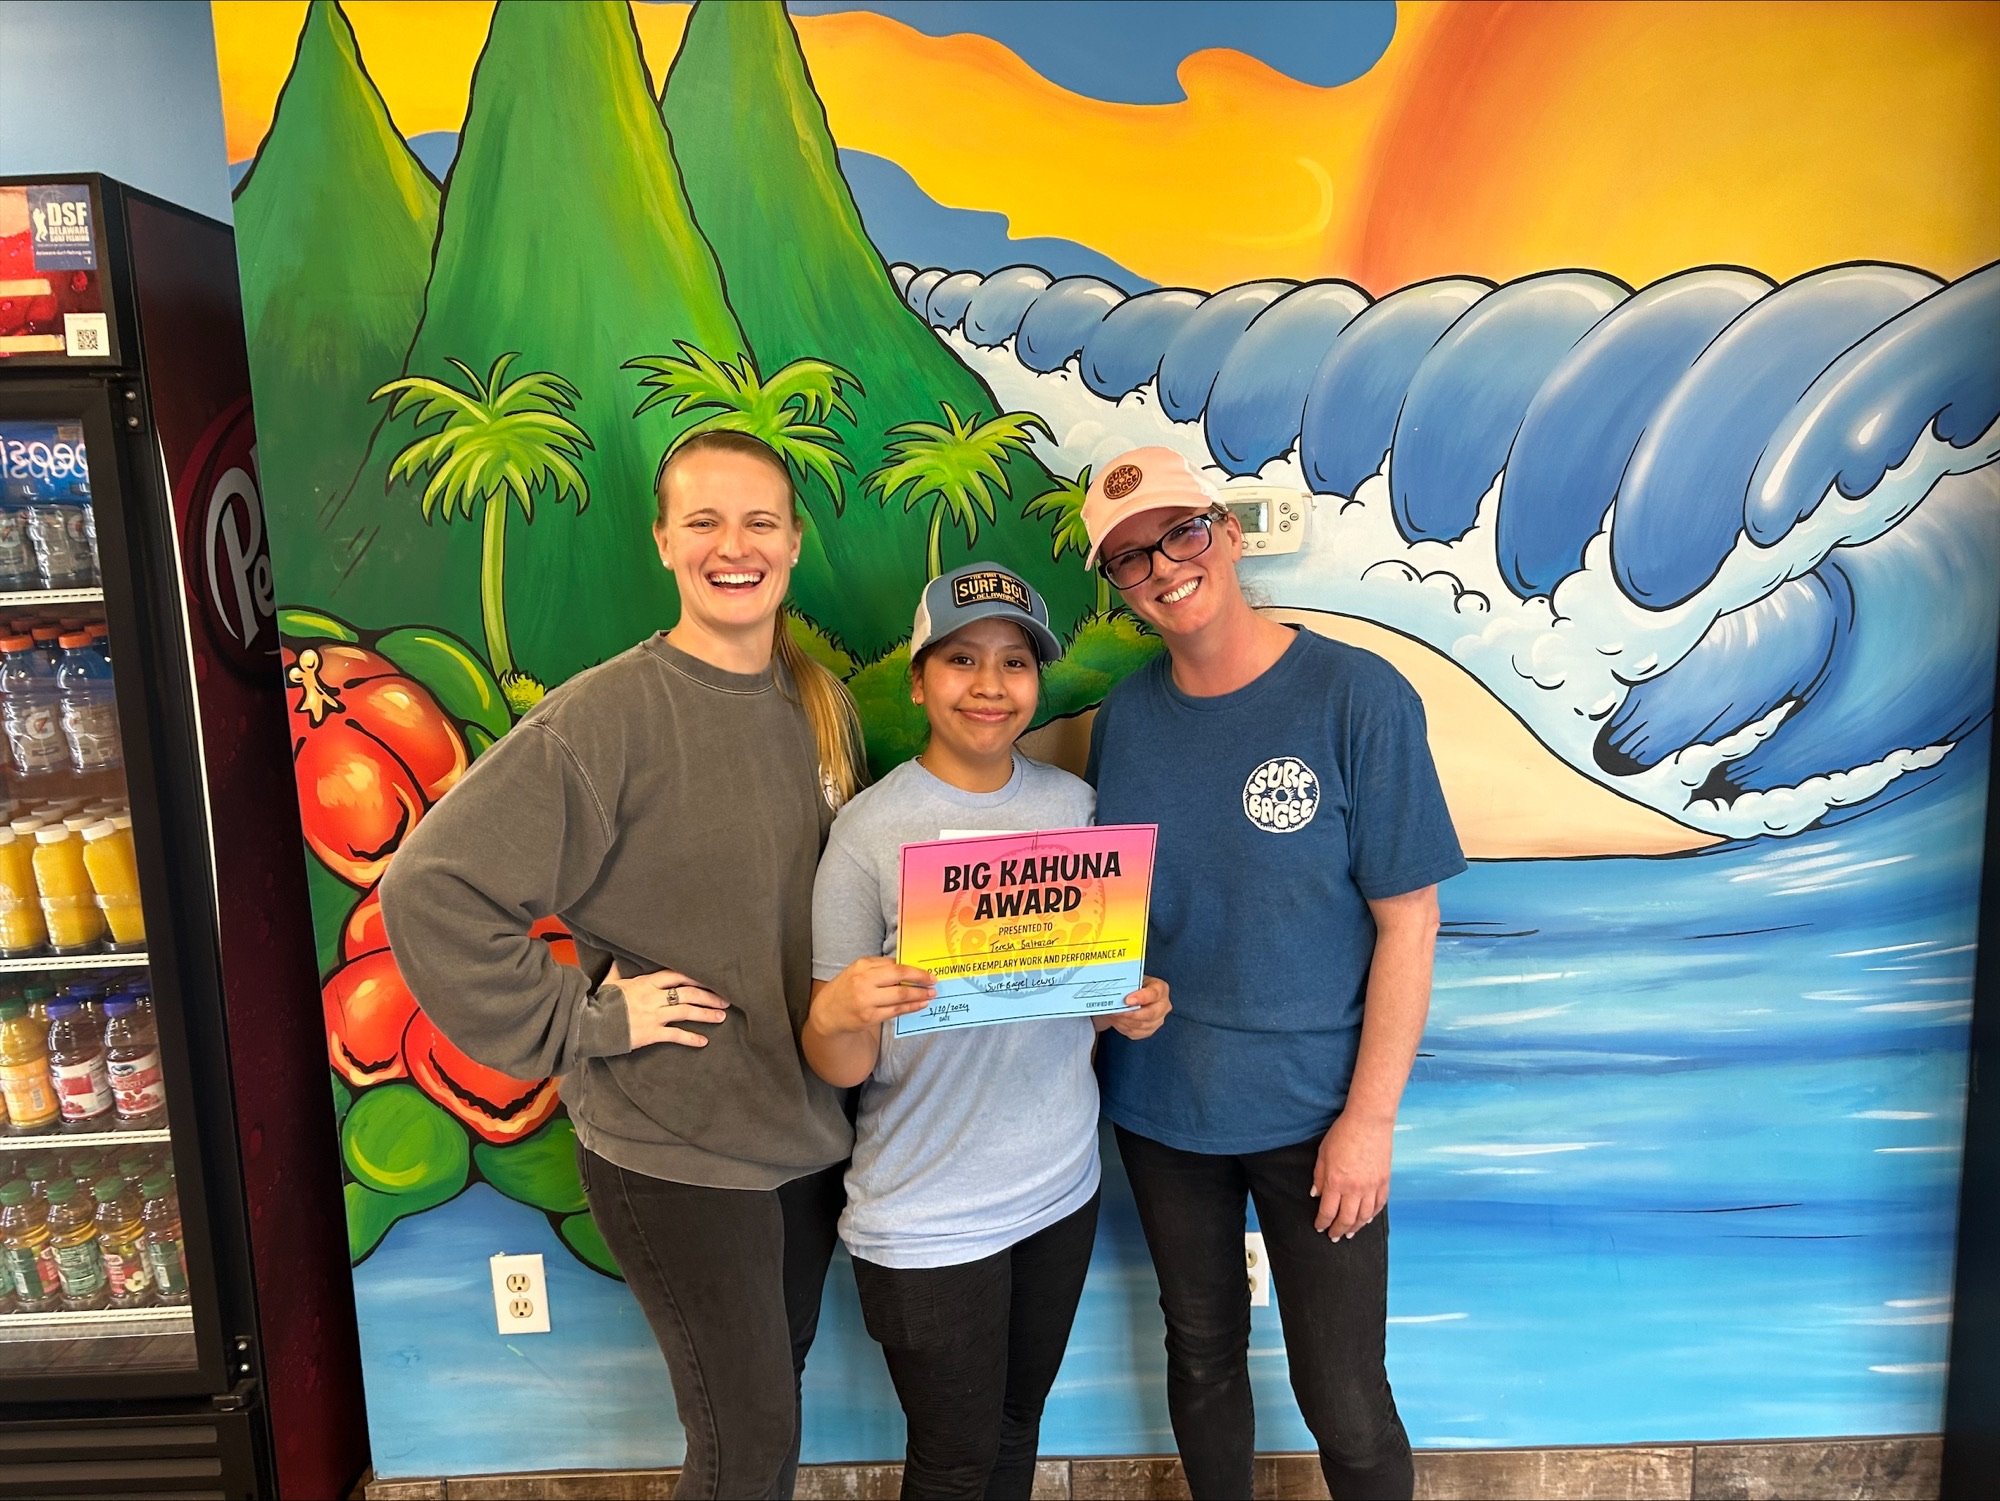 All smiles at Surf Bagel Lewes for our Big Kahuna, Teresa! 

Teresa is an exemplary employee who takes pride in her work and being a great team player! We are so proud of her. 🤙🤙🤙